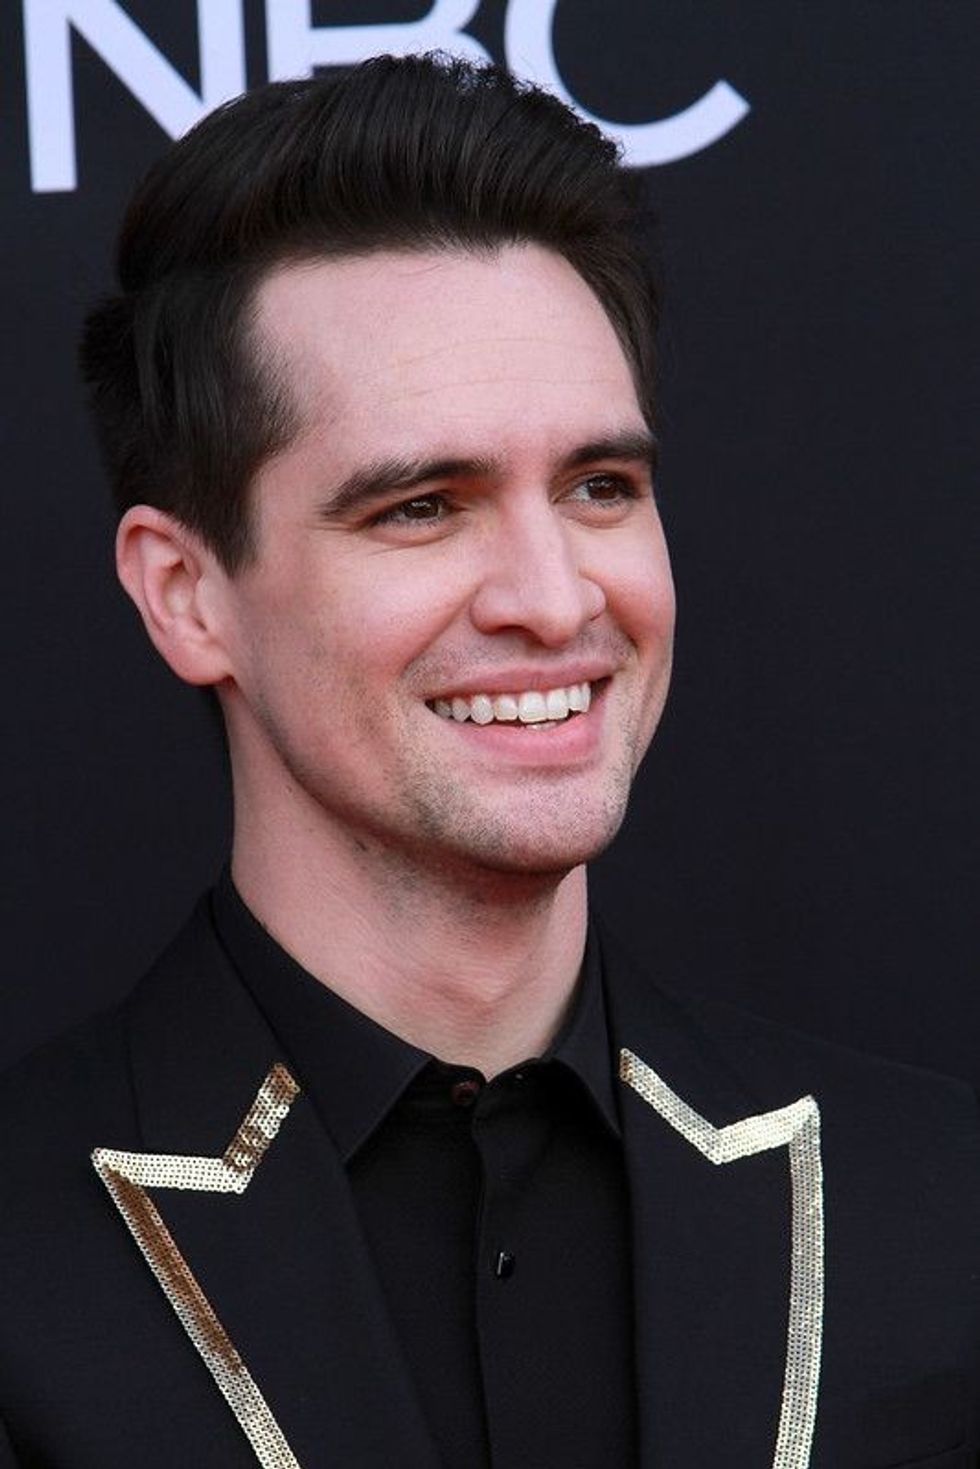 Brendon Urie's candid picture